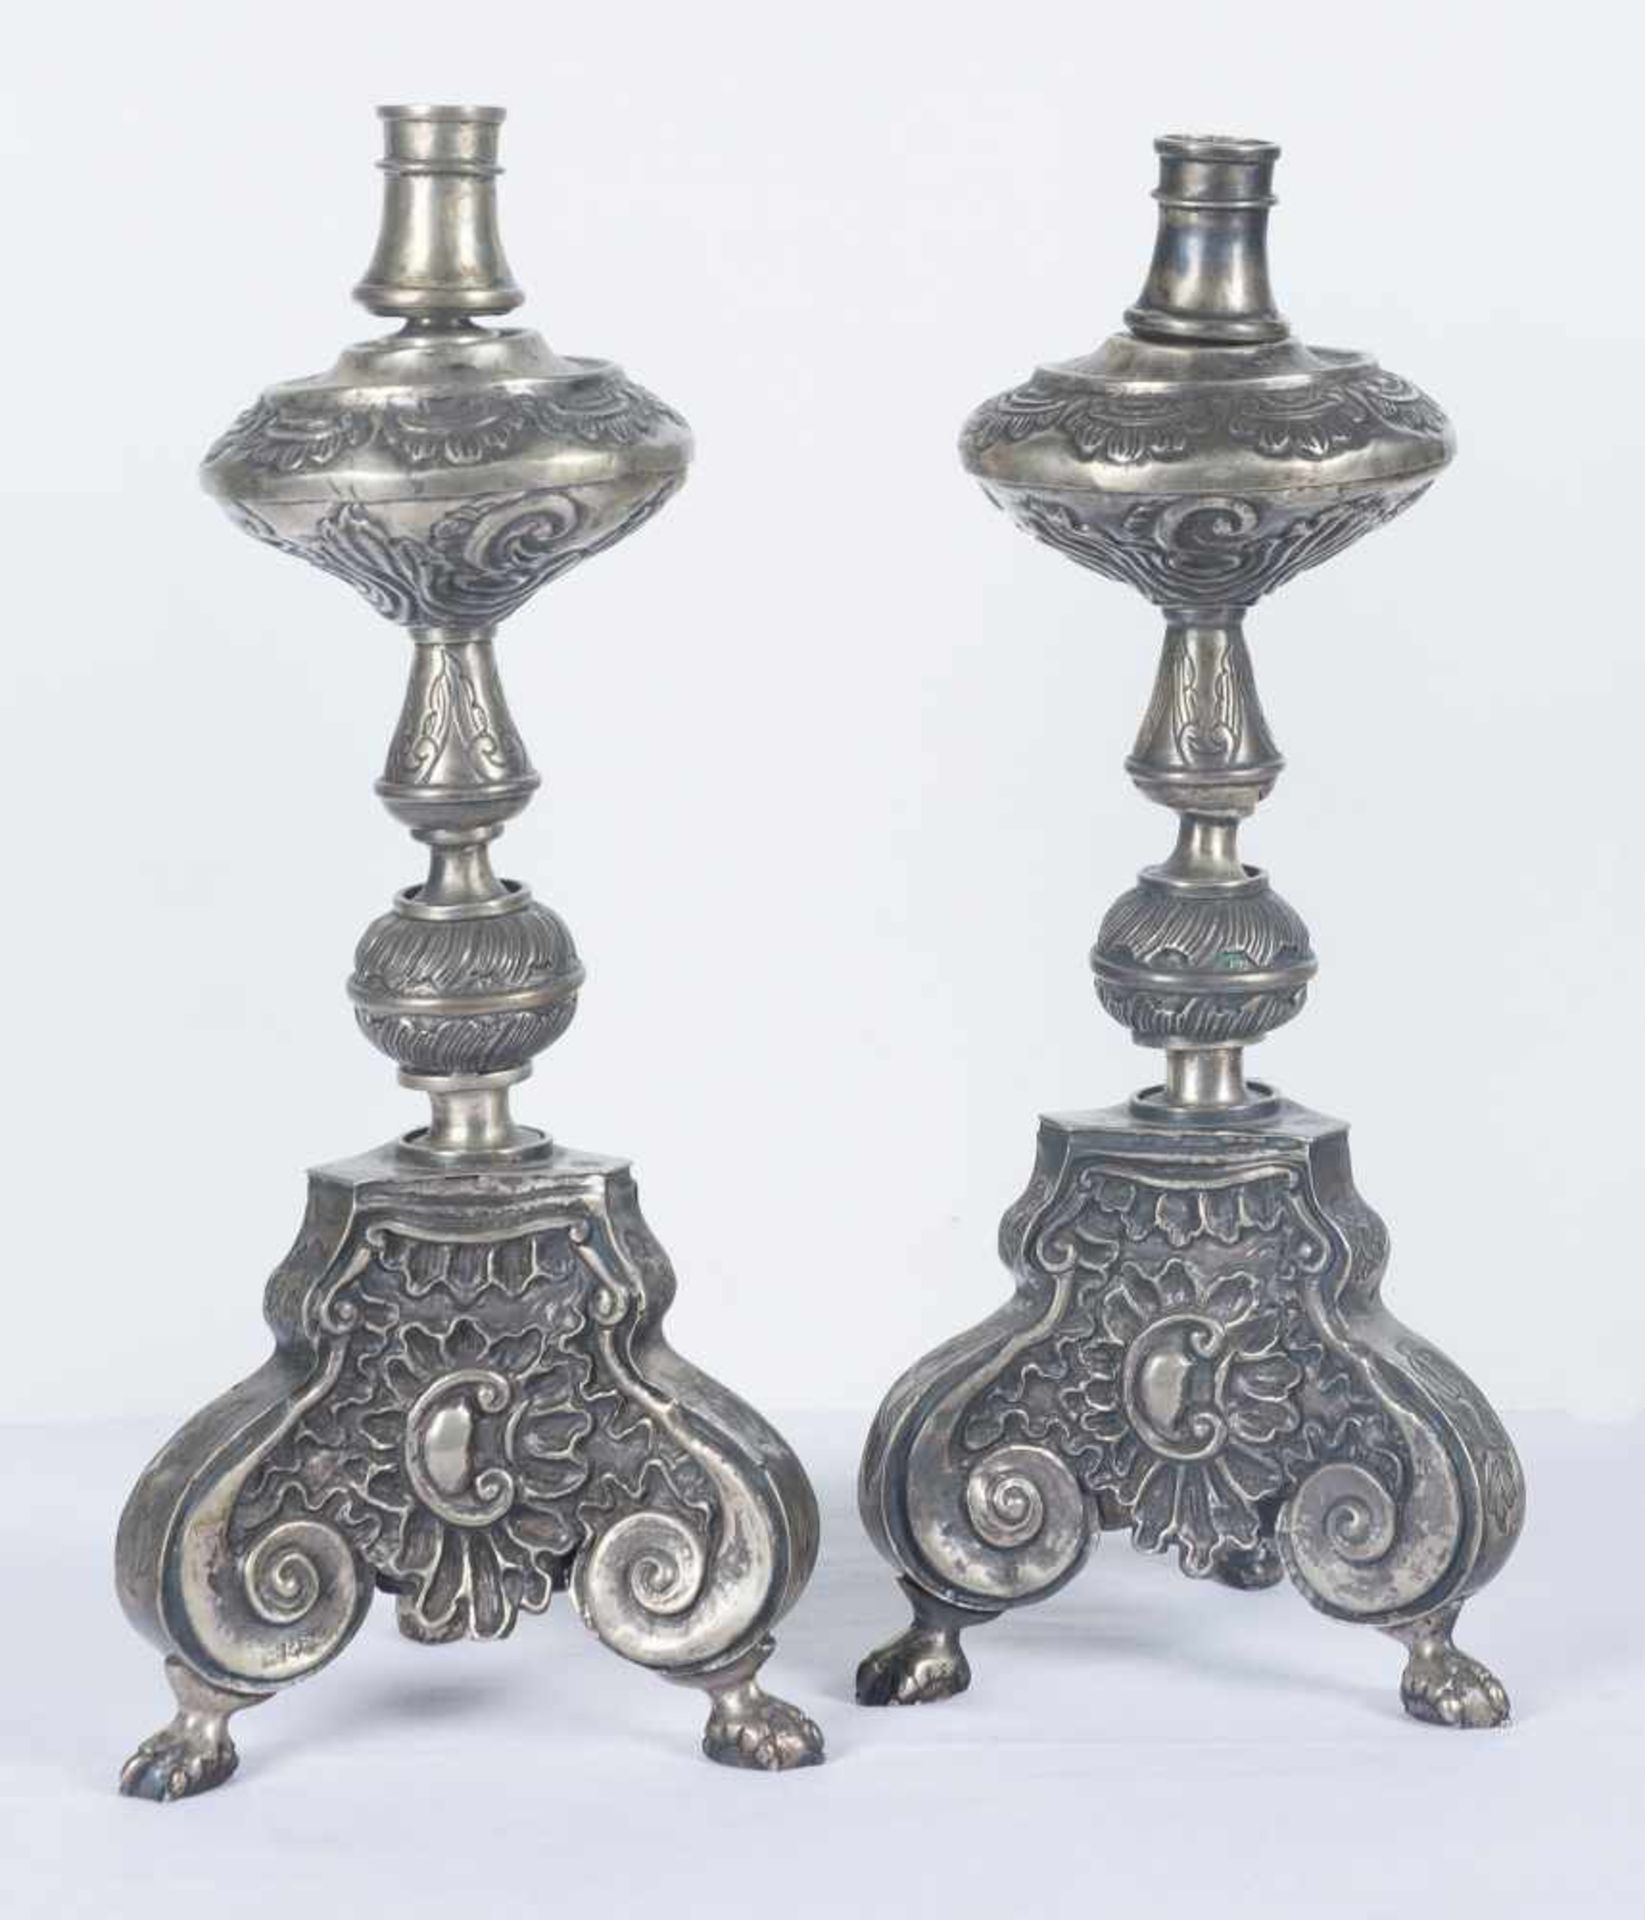 Pair of embossed silver candlesticks with wooden interior. 18th century. Height: 30,5 cm. each.